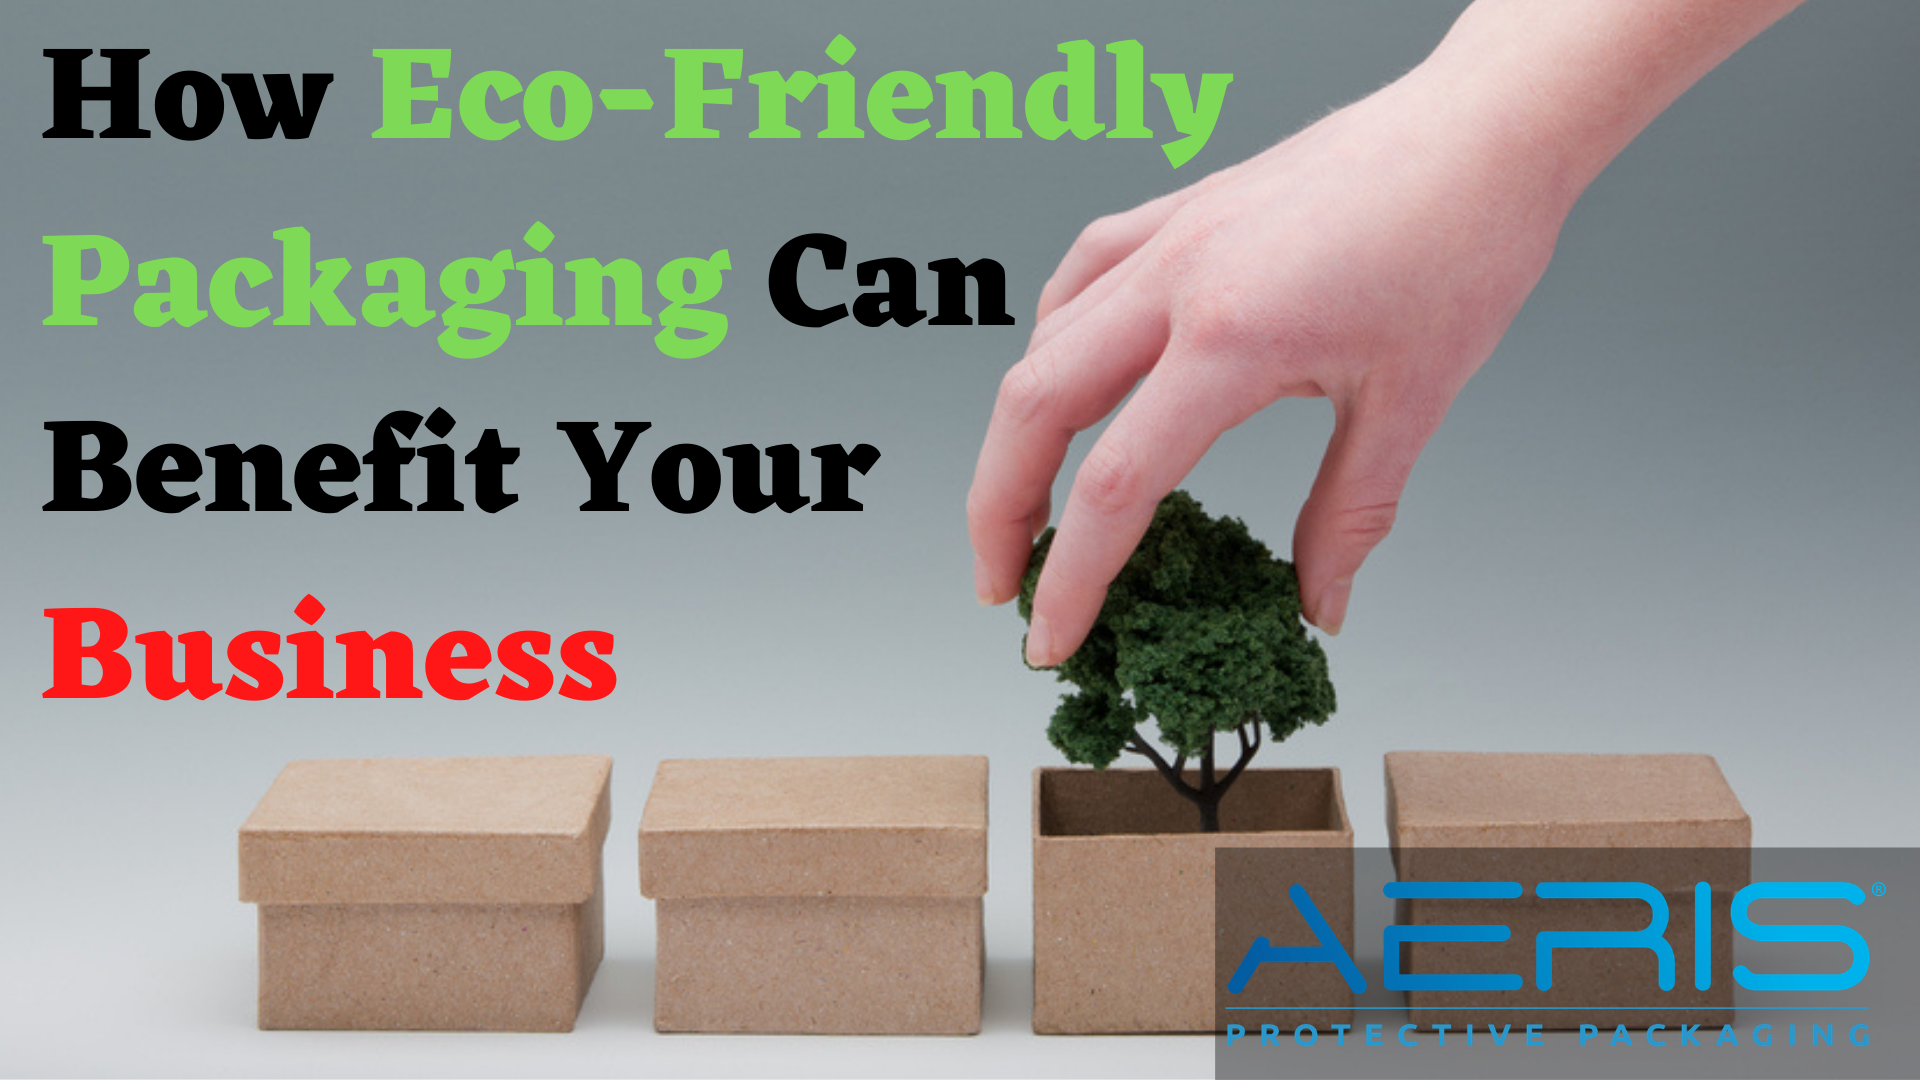 How EcoFriendly Packaging Can Benefit Your Business